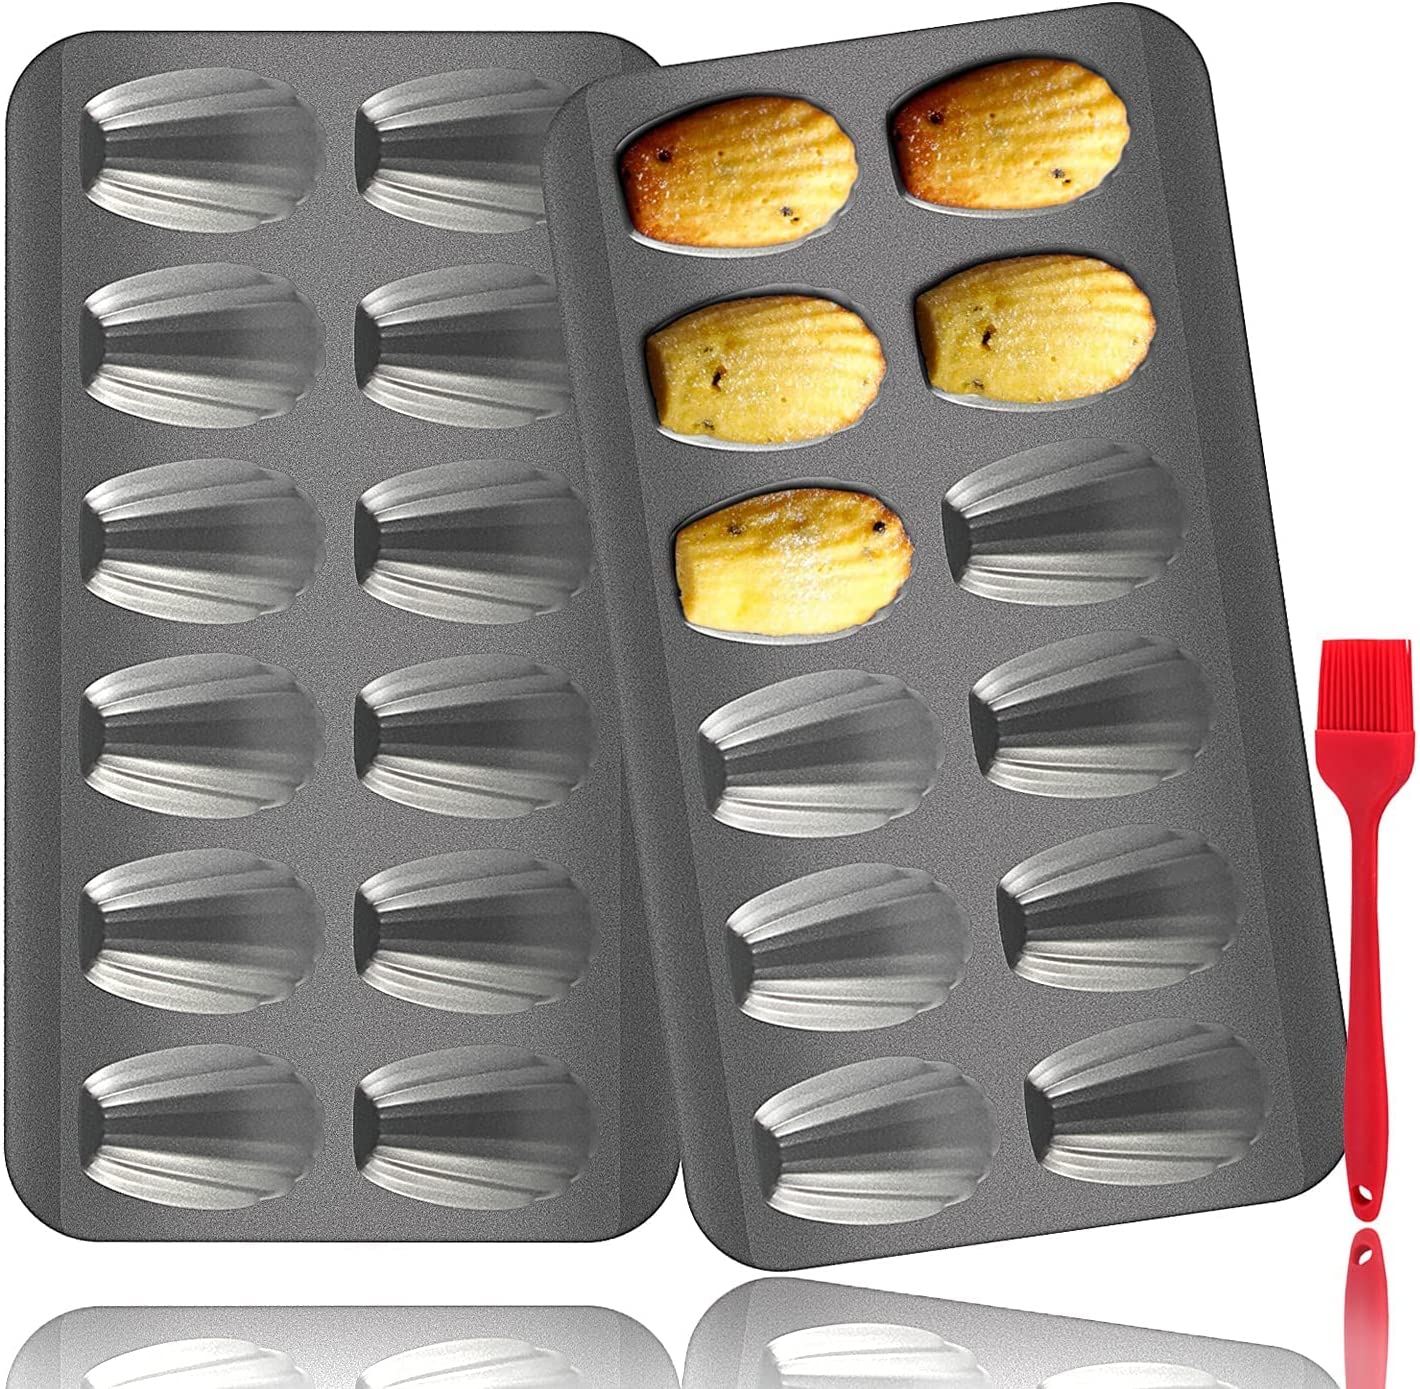 OAMCEG Commercial Food Grade Madeleine Pan, 12-Cup